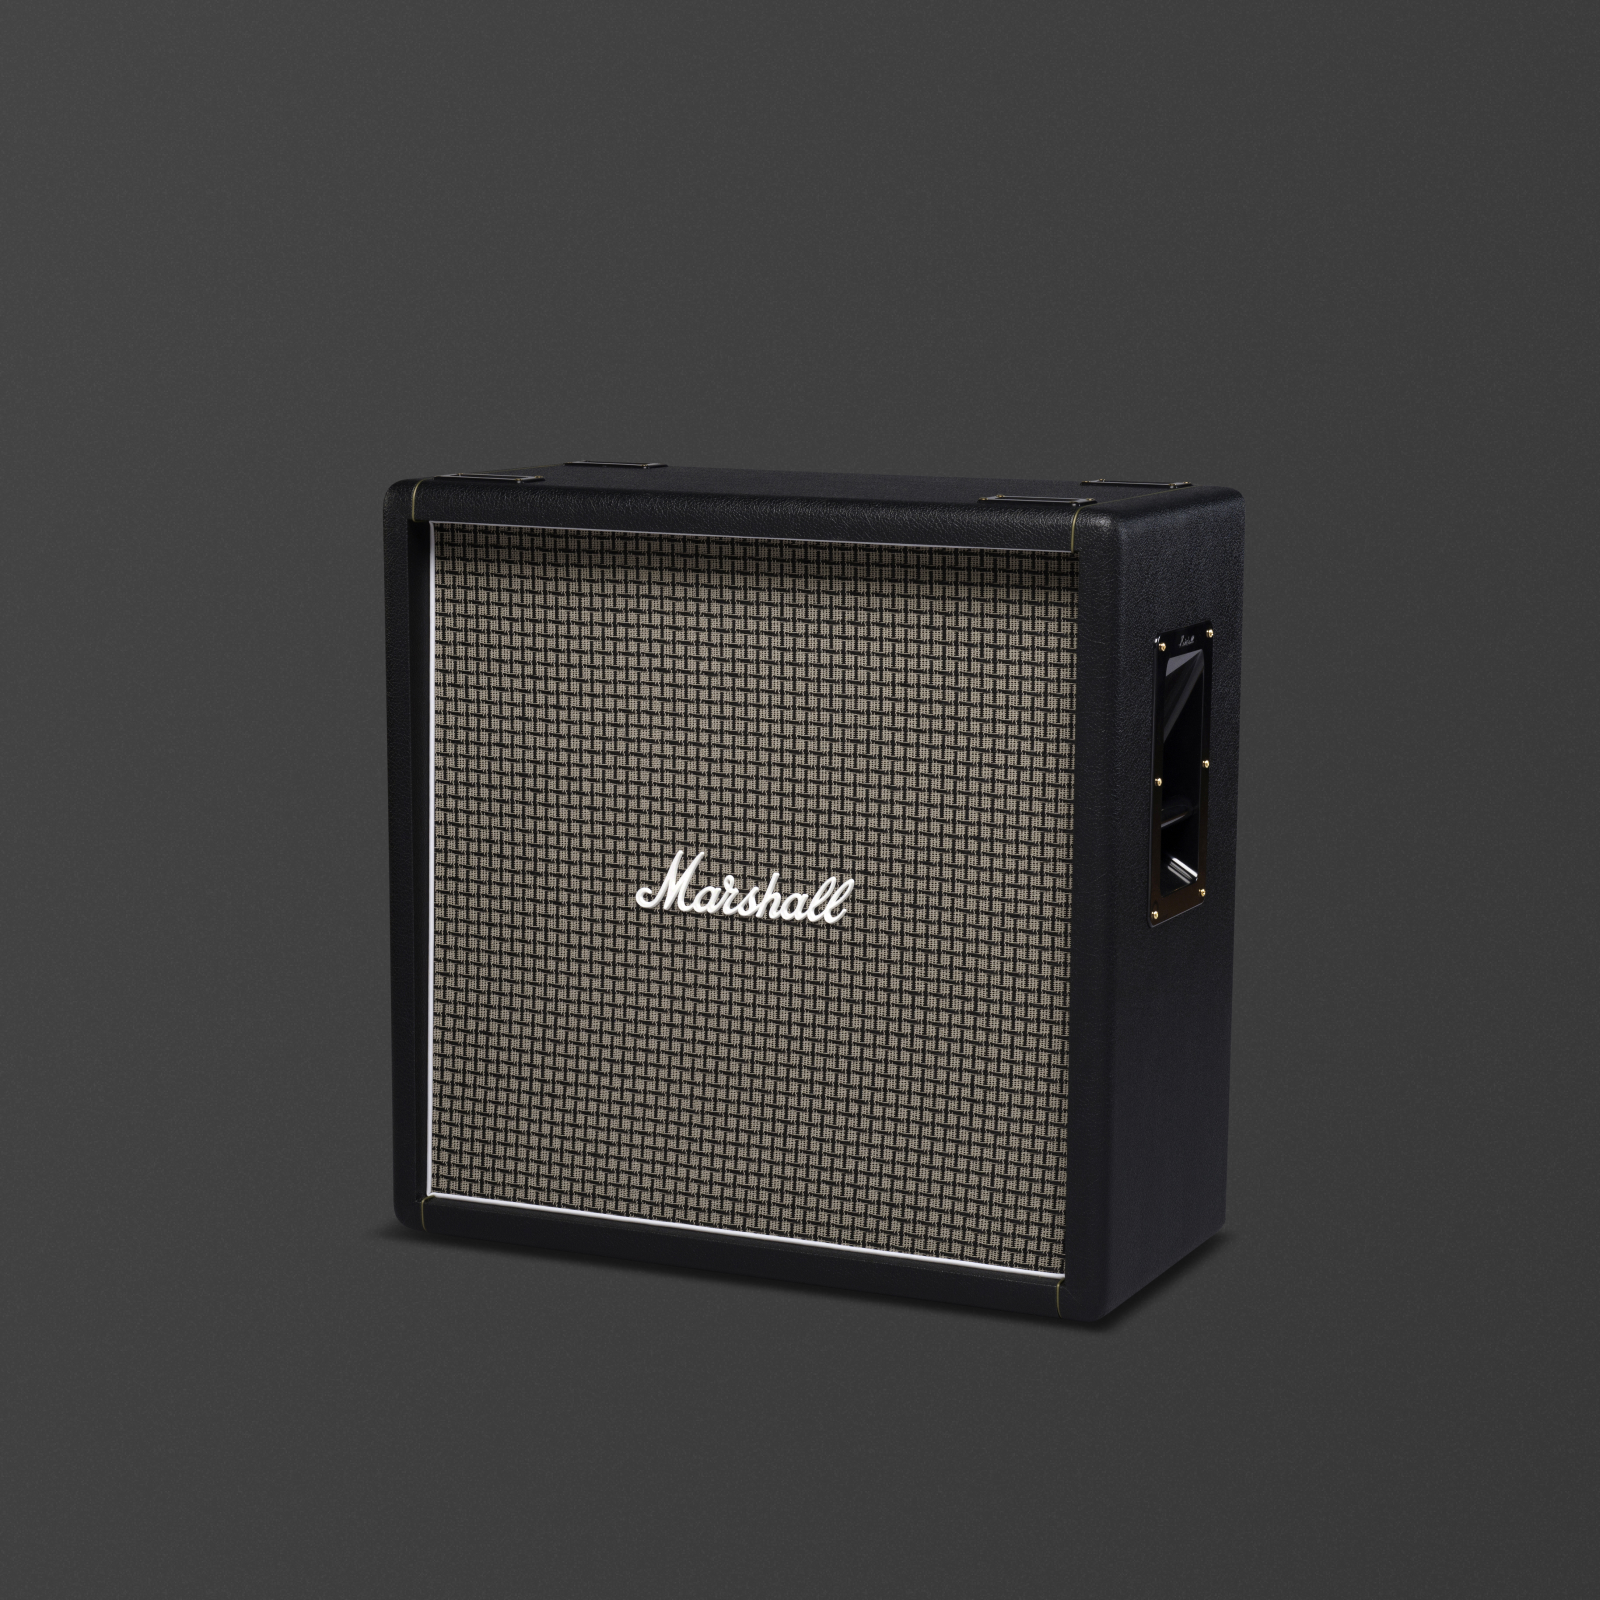 Marshall's 1960BX cabinet with a chequered 70's grill cloth.  